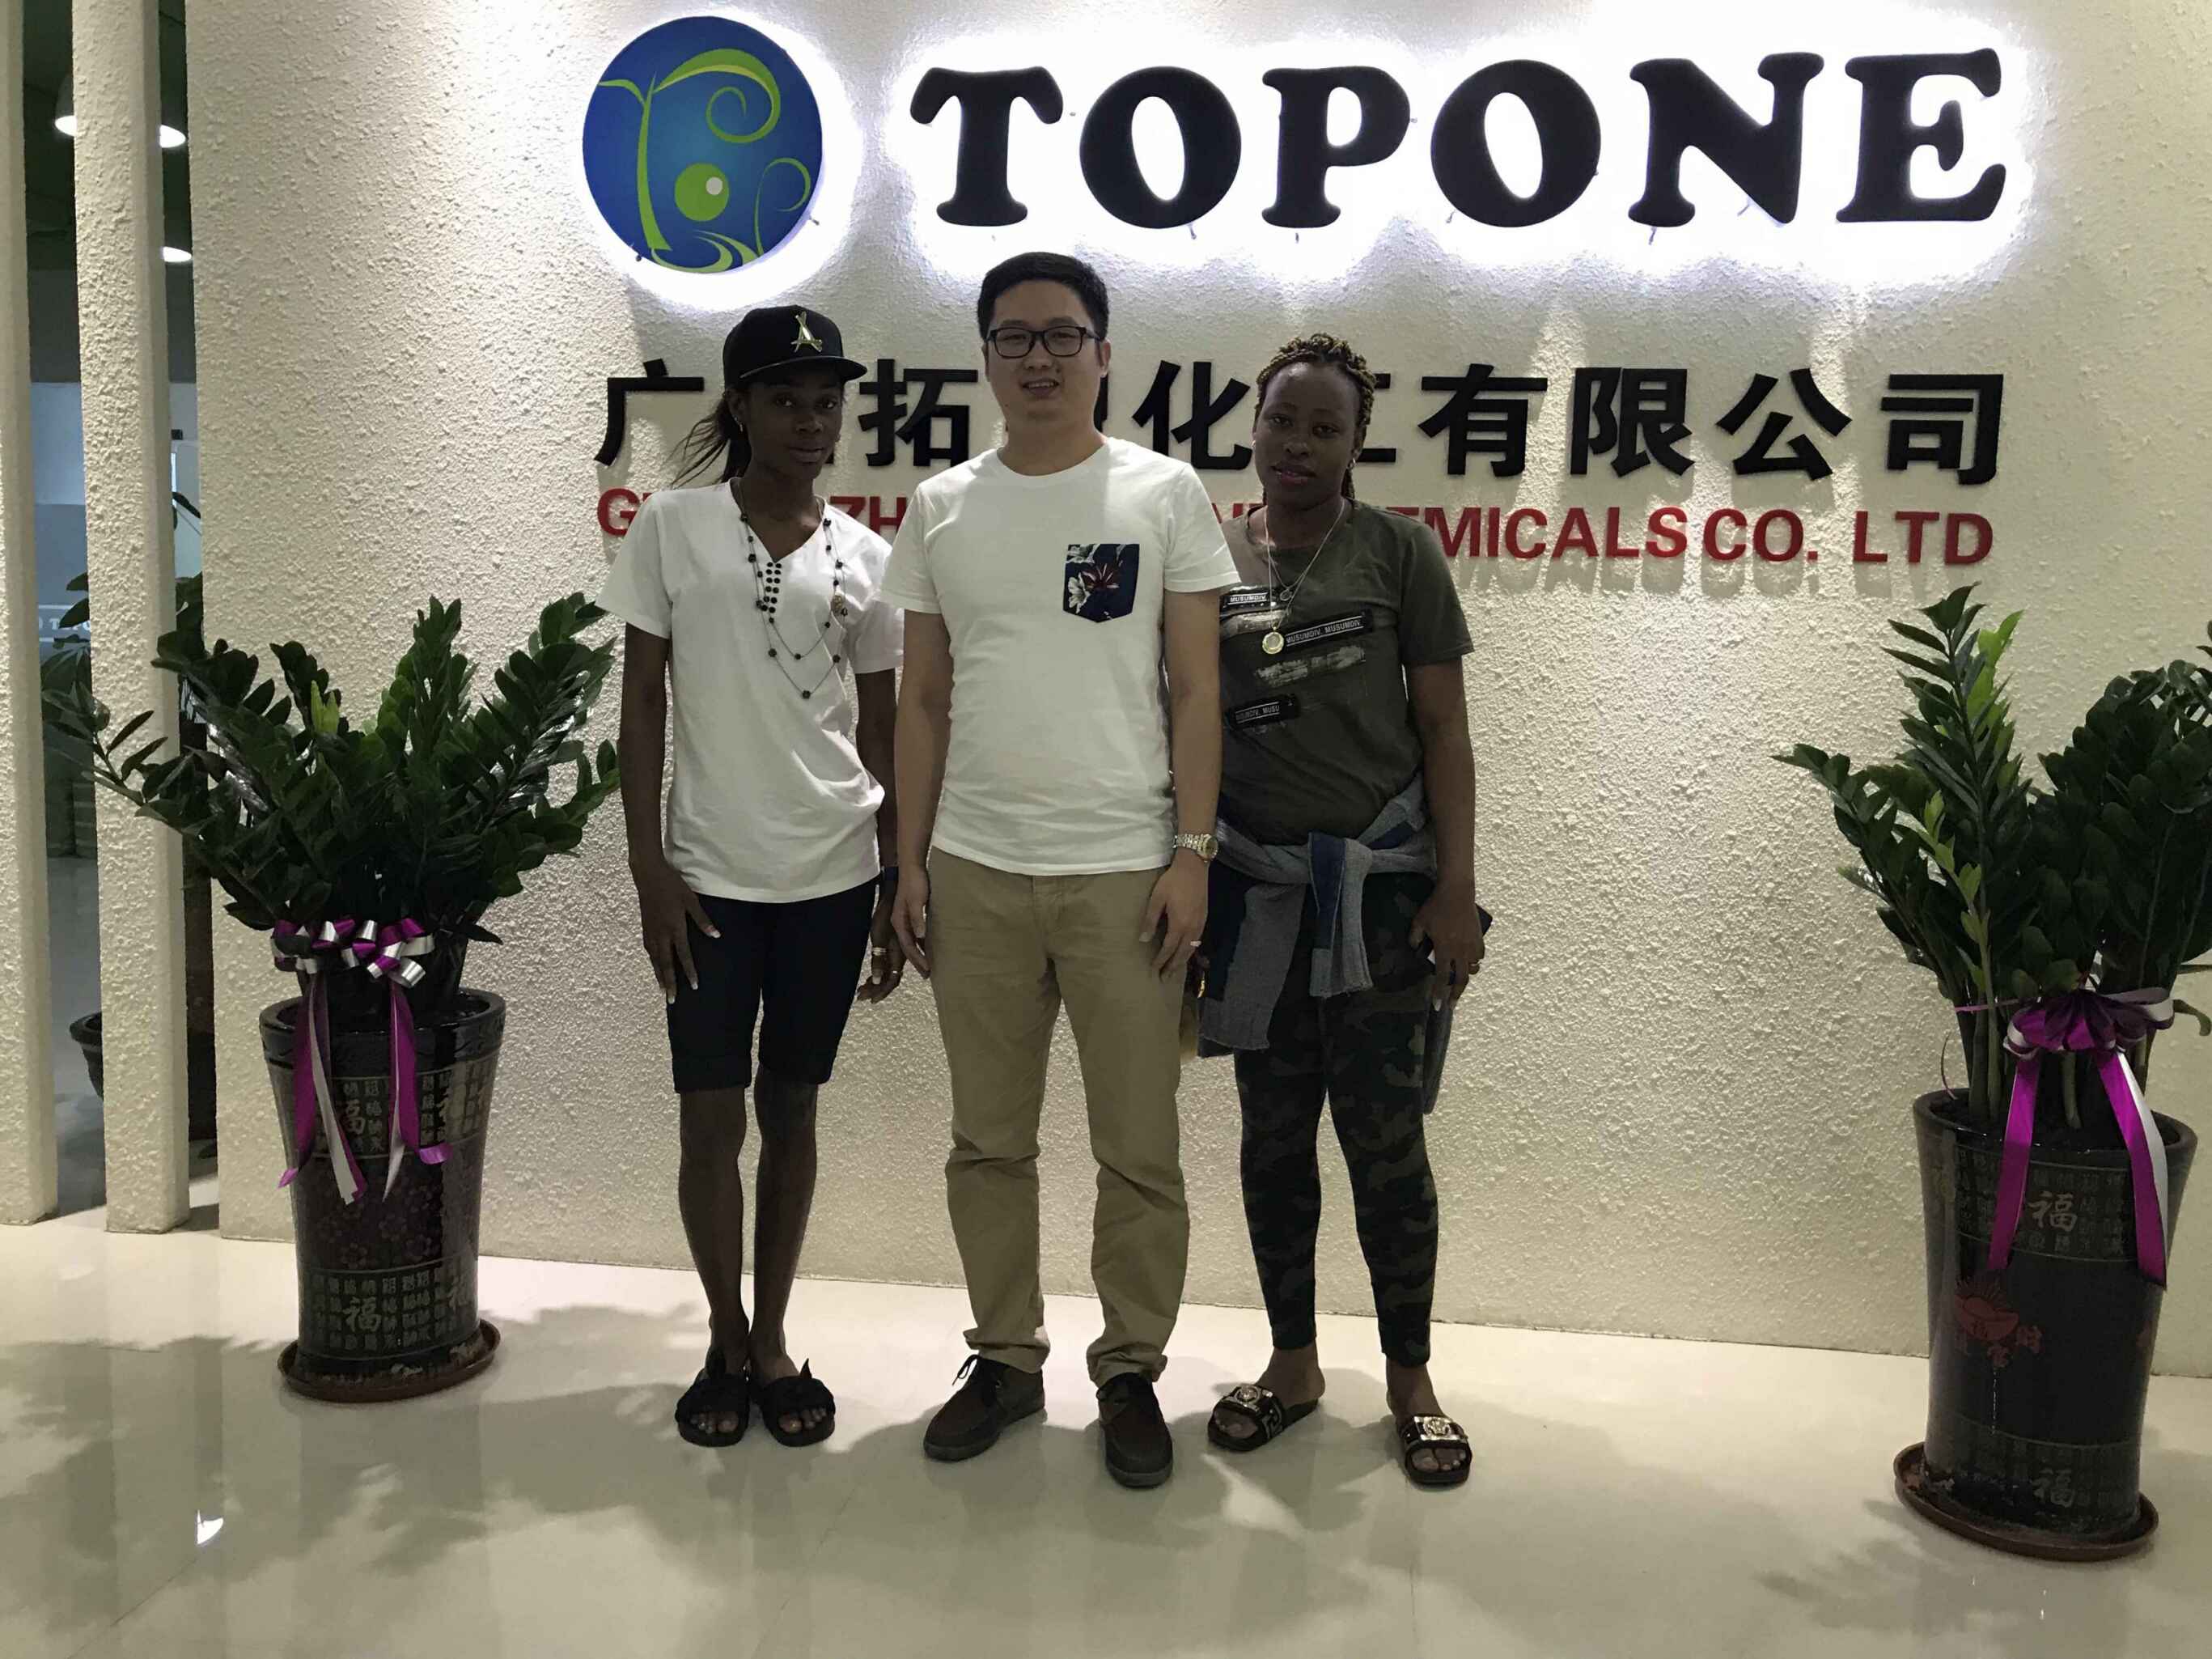 Welcome Clients From Congo Africa Visit Topone Company ---TOPONE NEWS